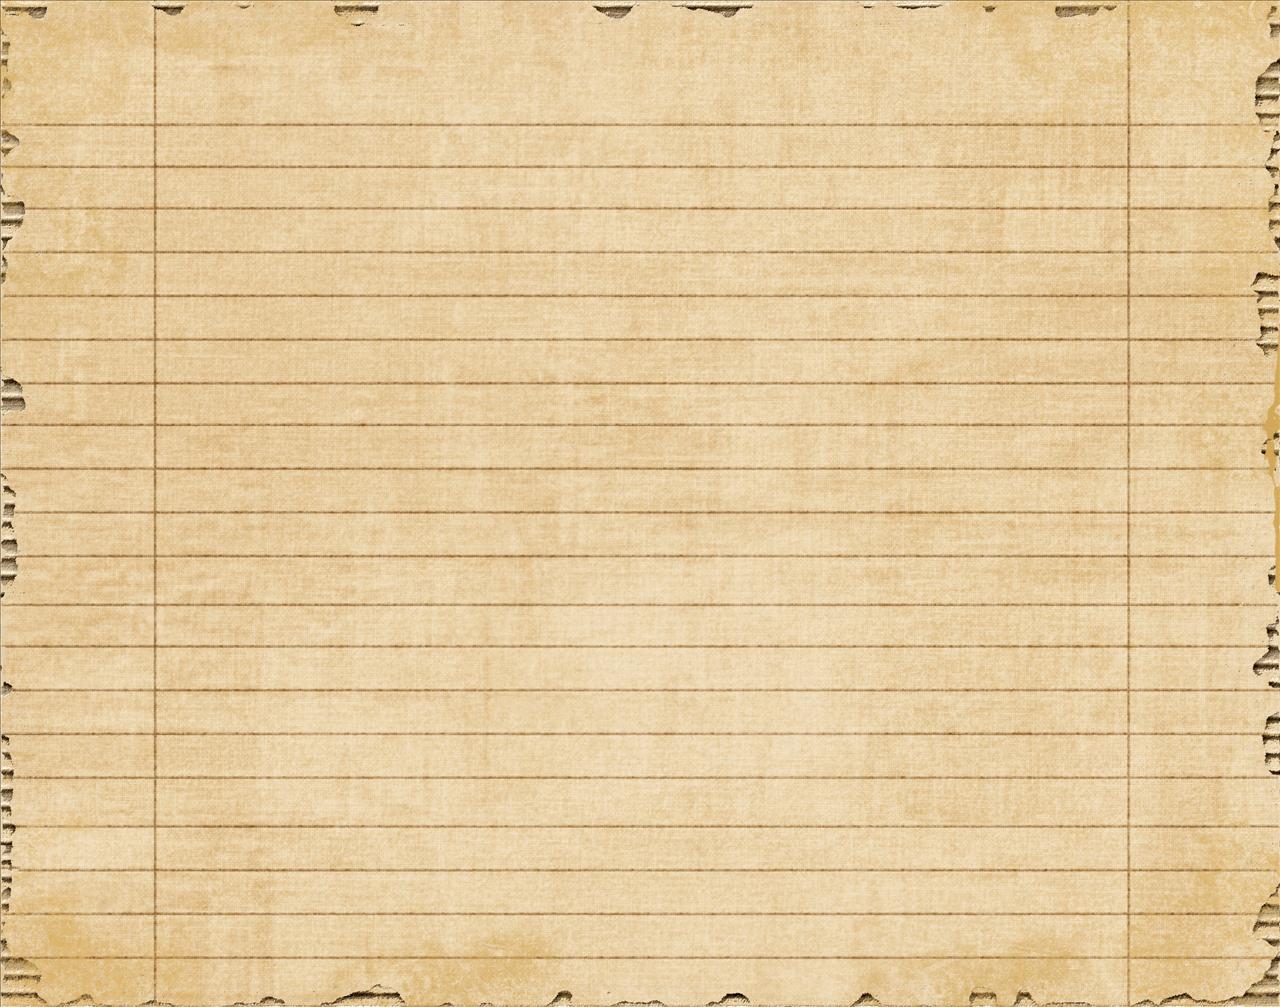 Notebook Paper Related Keywords & Suggestions Notebook Wallpaper Background for Powerpoint